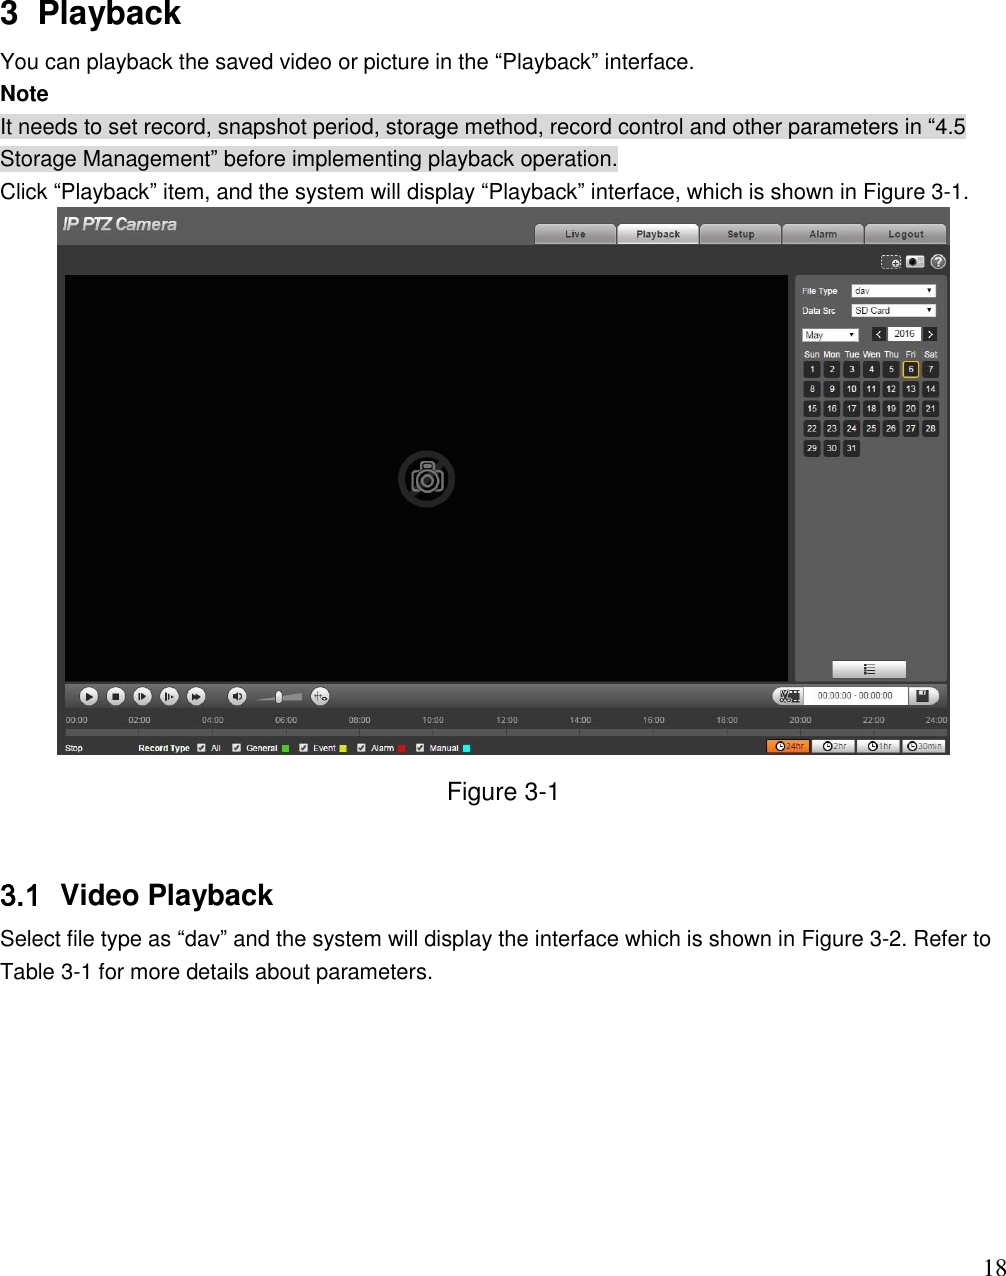                                                                              18 3  Playback You can playback the saved video or picture in the “Playback” interface.  Note It needs to set record, snapshot period, storage method, record control and other parameters in “4.5 Storage Management” before implementing playback operation.  Click “Playback” item, and the system will display “Playback” interface, which is shown in Figure 3-1.   Figure 3-1  3.1  Video Playback  Select file type as “dav” and the system will display the interface which is shown in Figure 3-2. Refer to Table 3-1 for more details about parameters. 